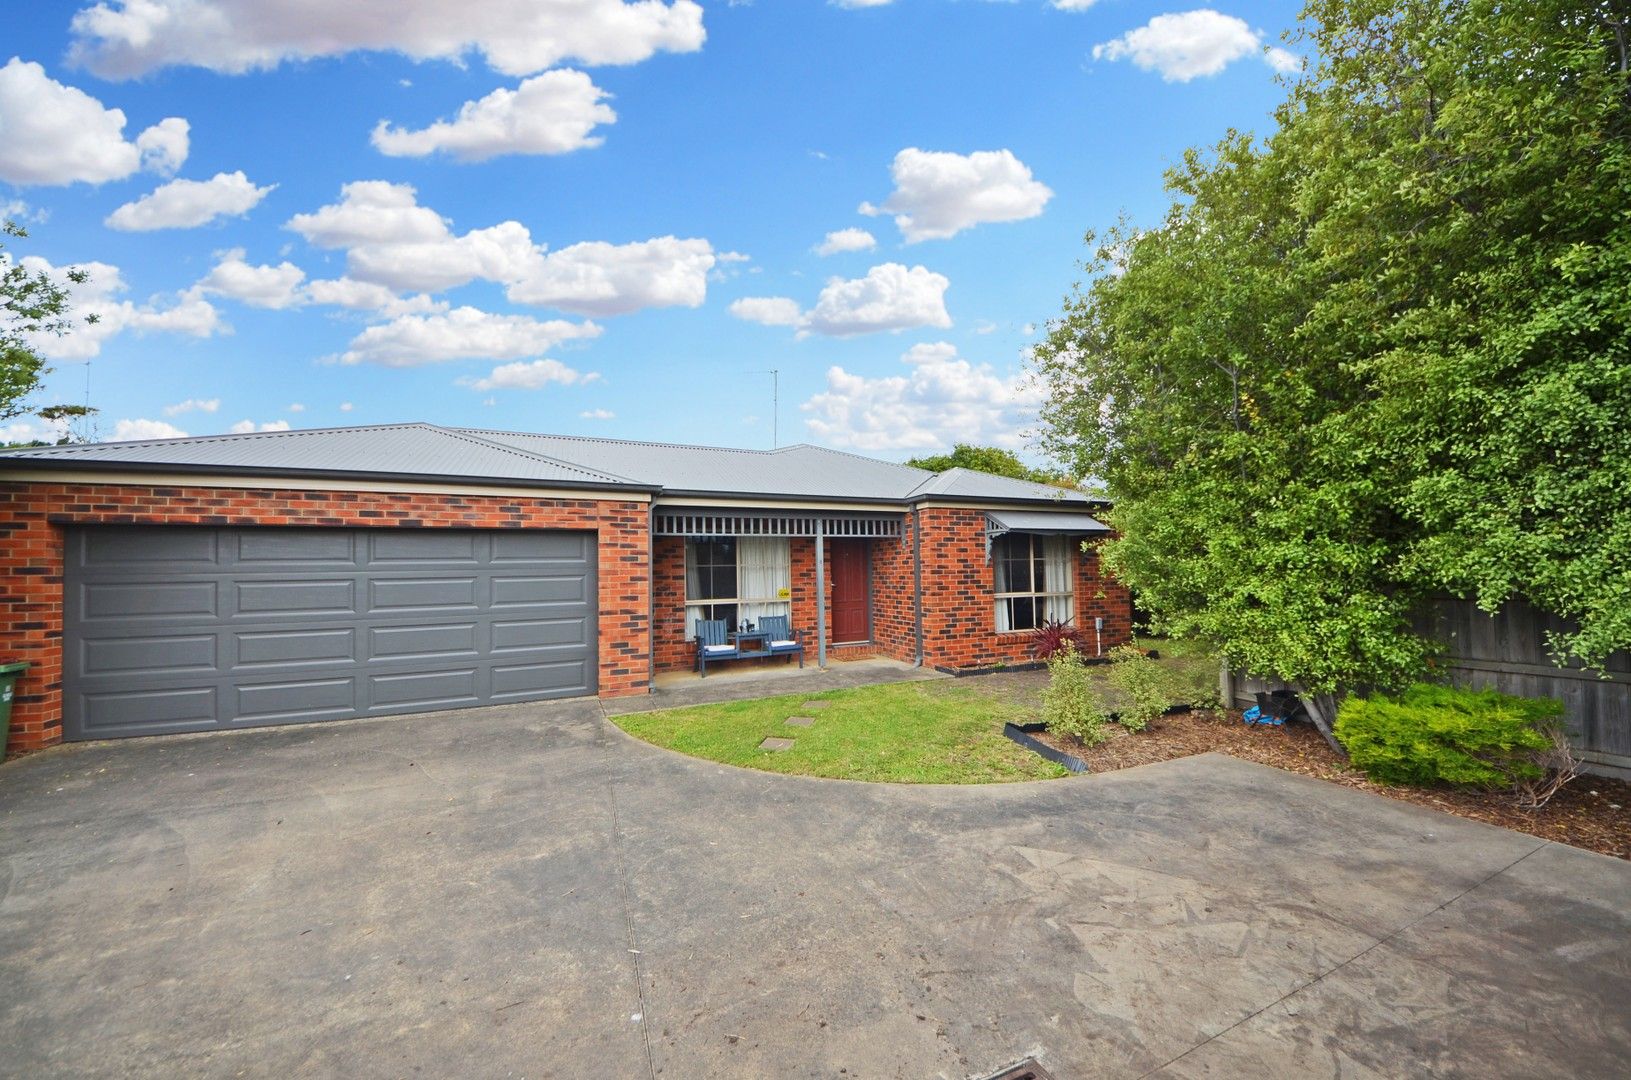 3 bedrooms House in 2/7 Shevill Court PORTLAND VIC, 3305